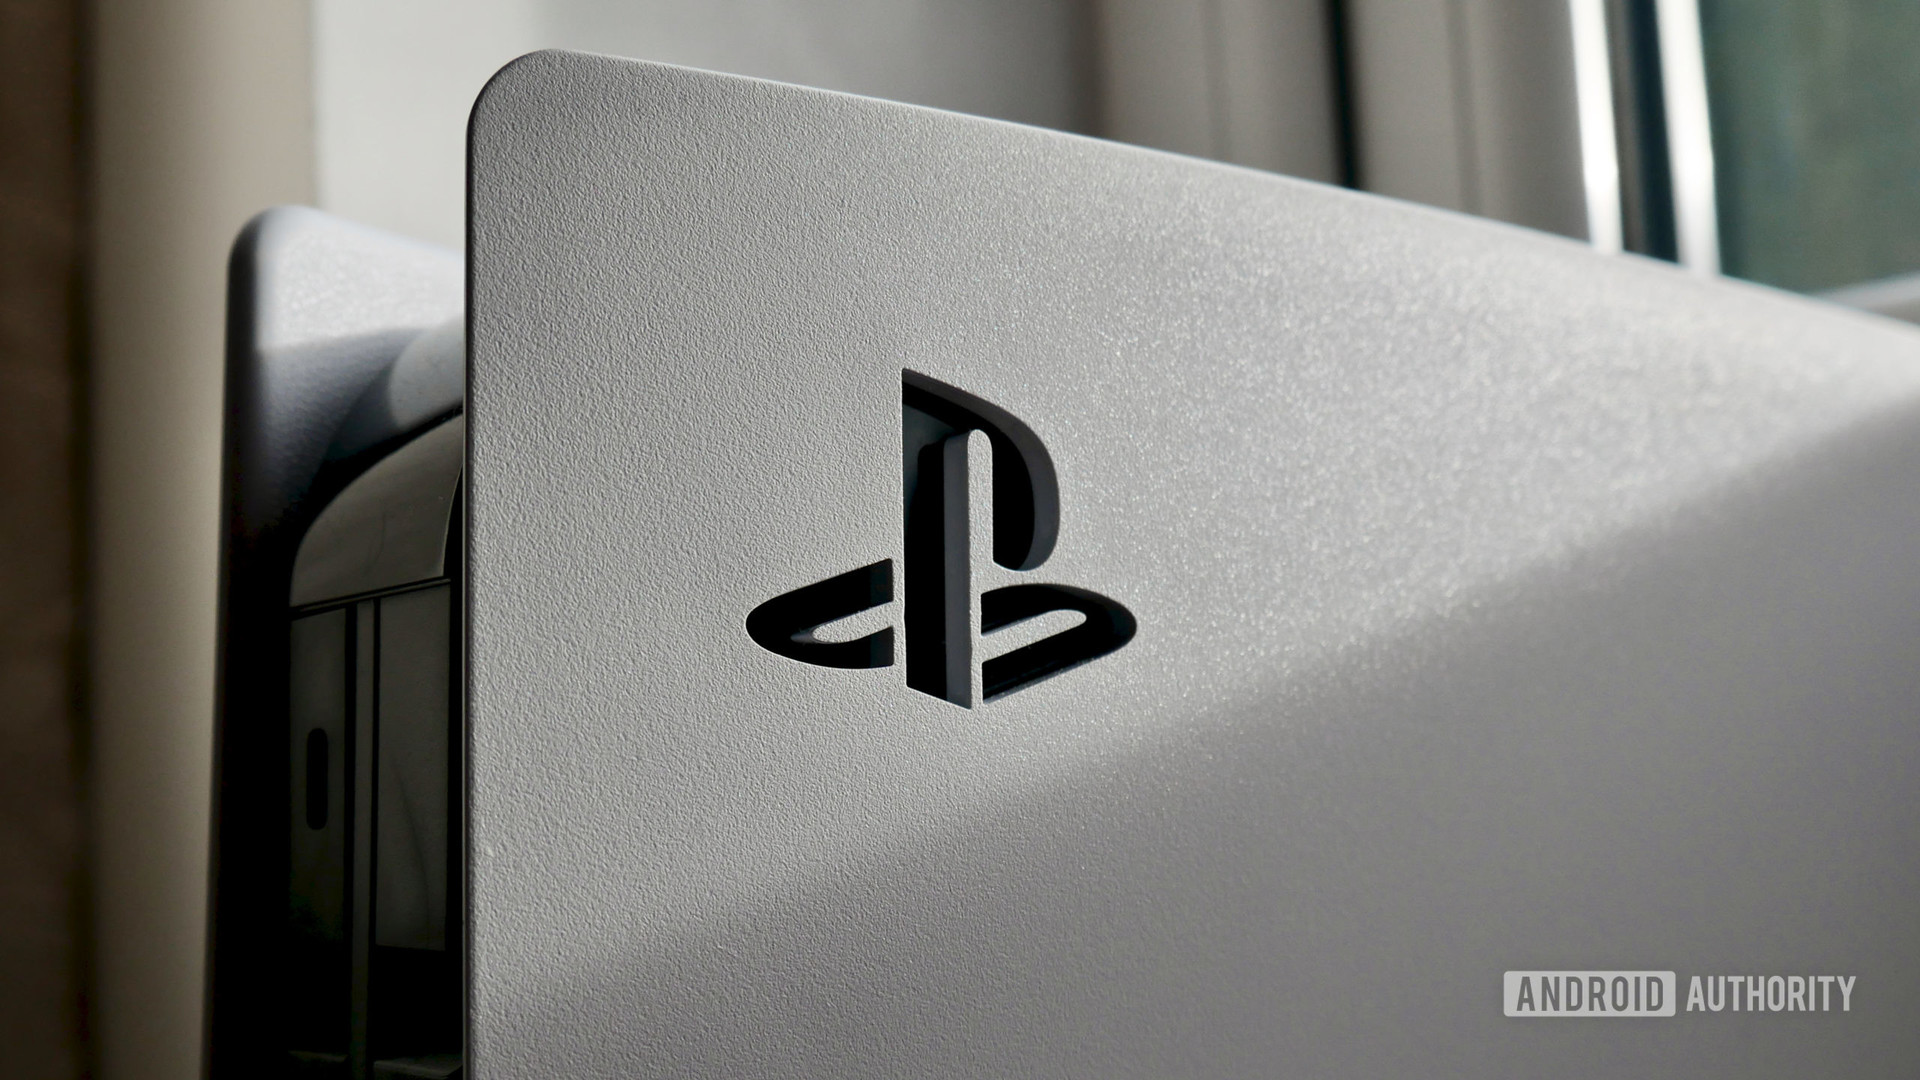 PlayStation history: Every Sony console from PS1 to PS5